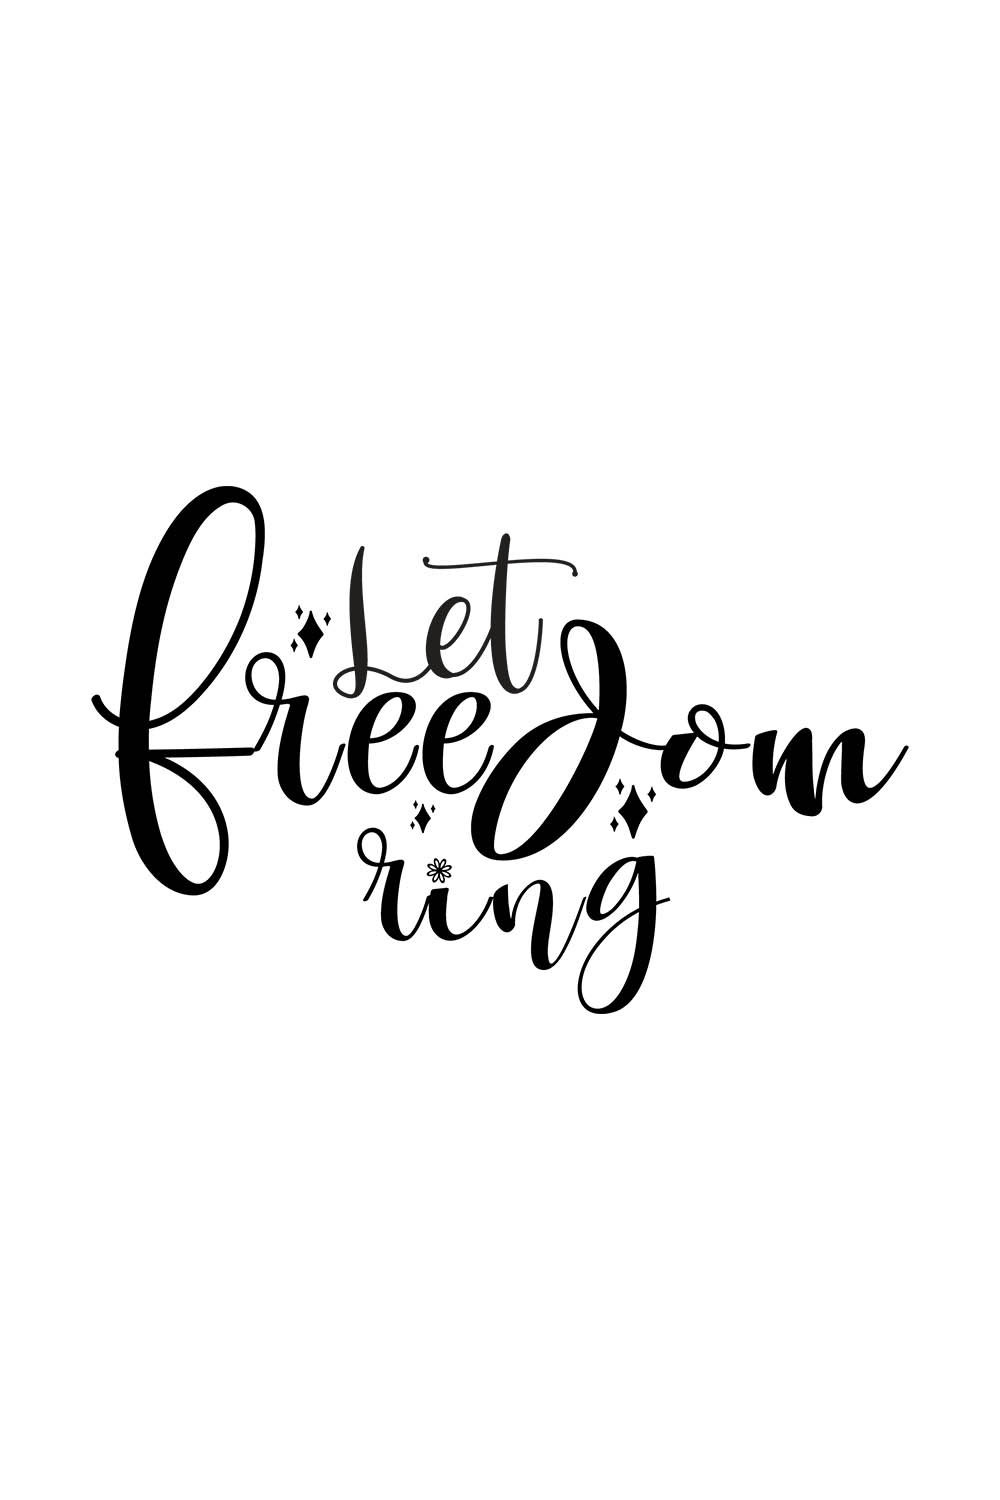 Image with unique black lettering for Let Freedom Ring prints.